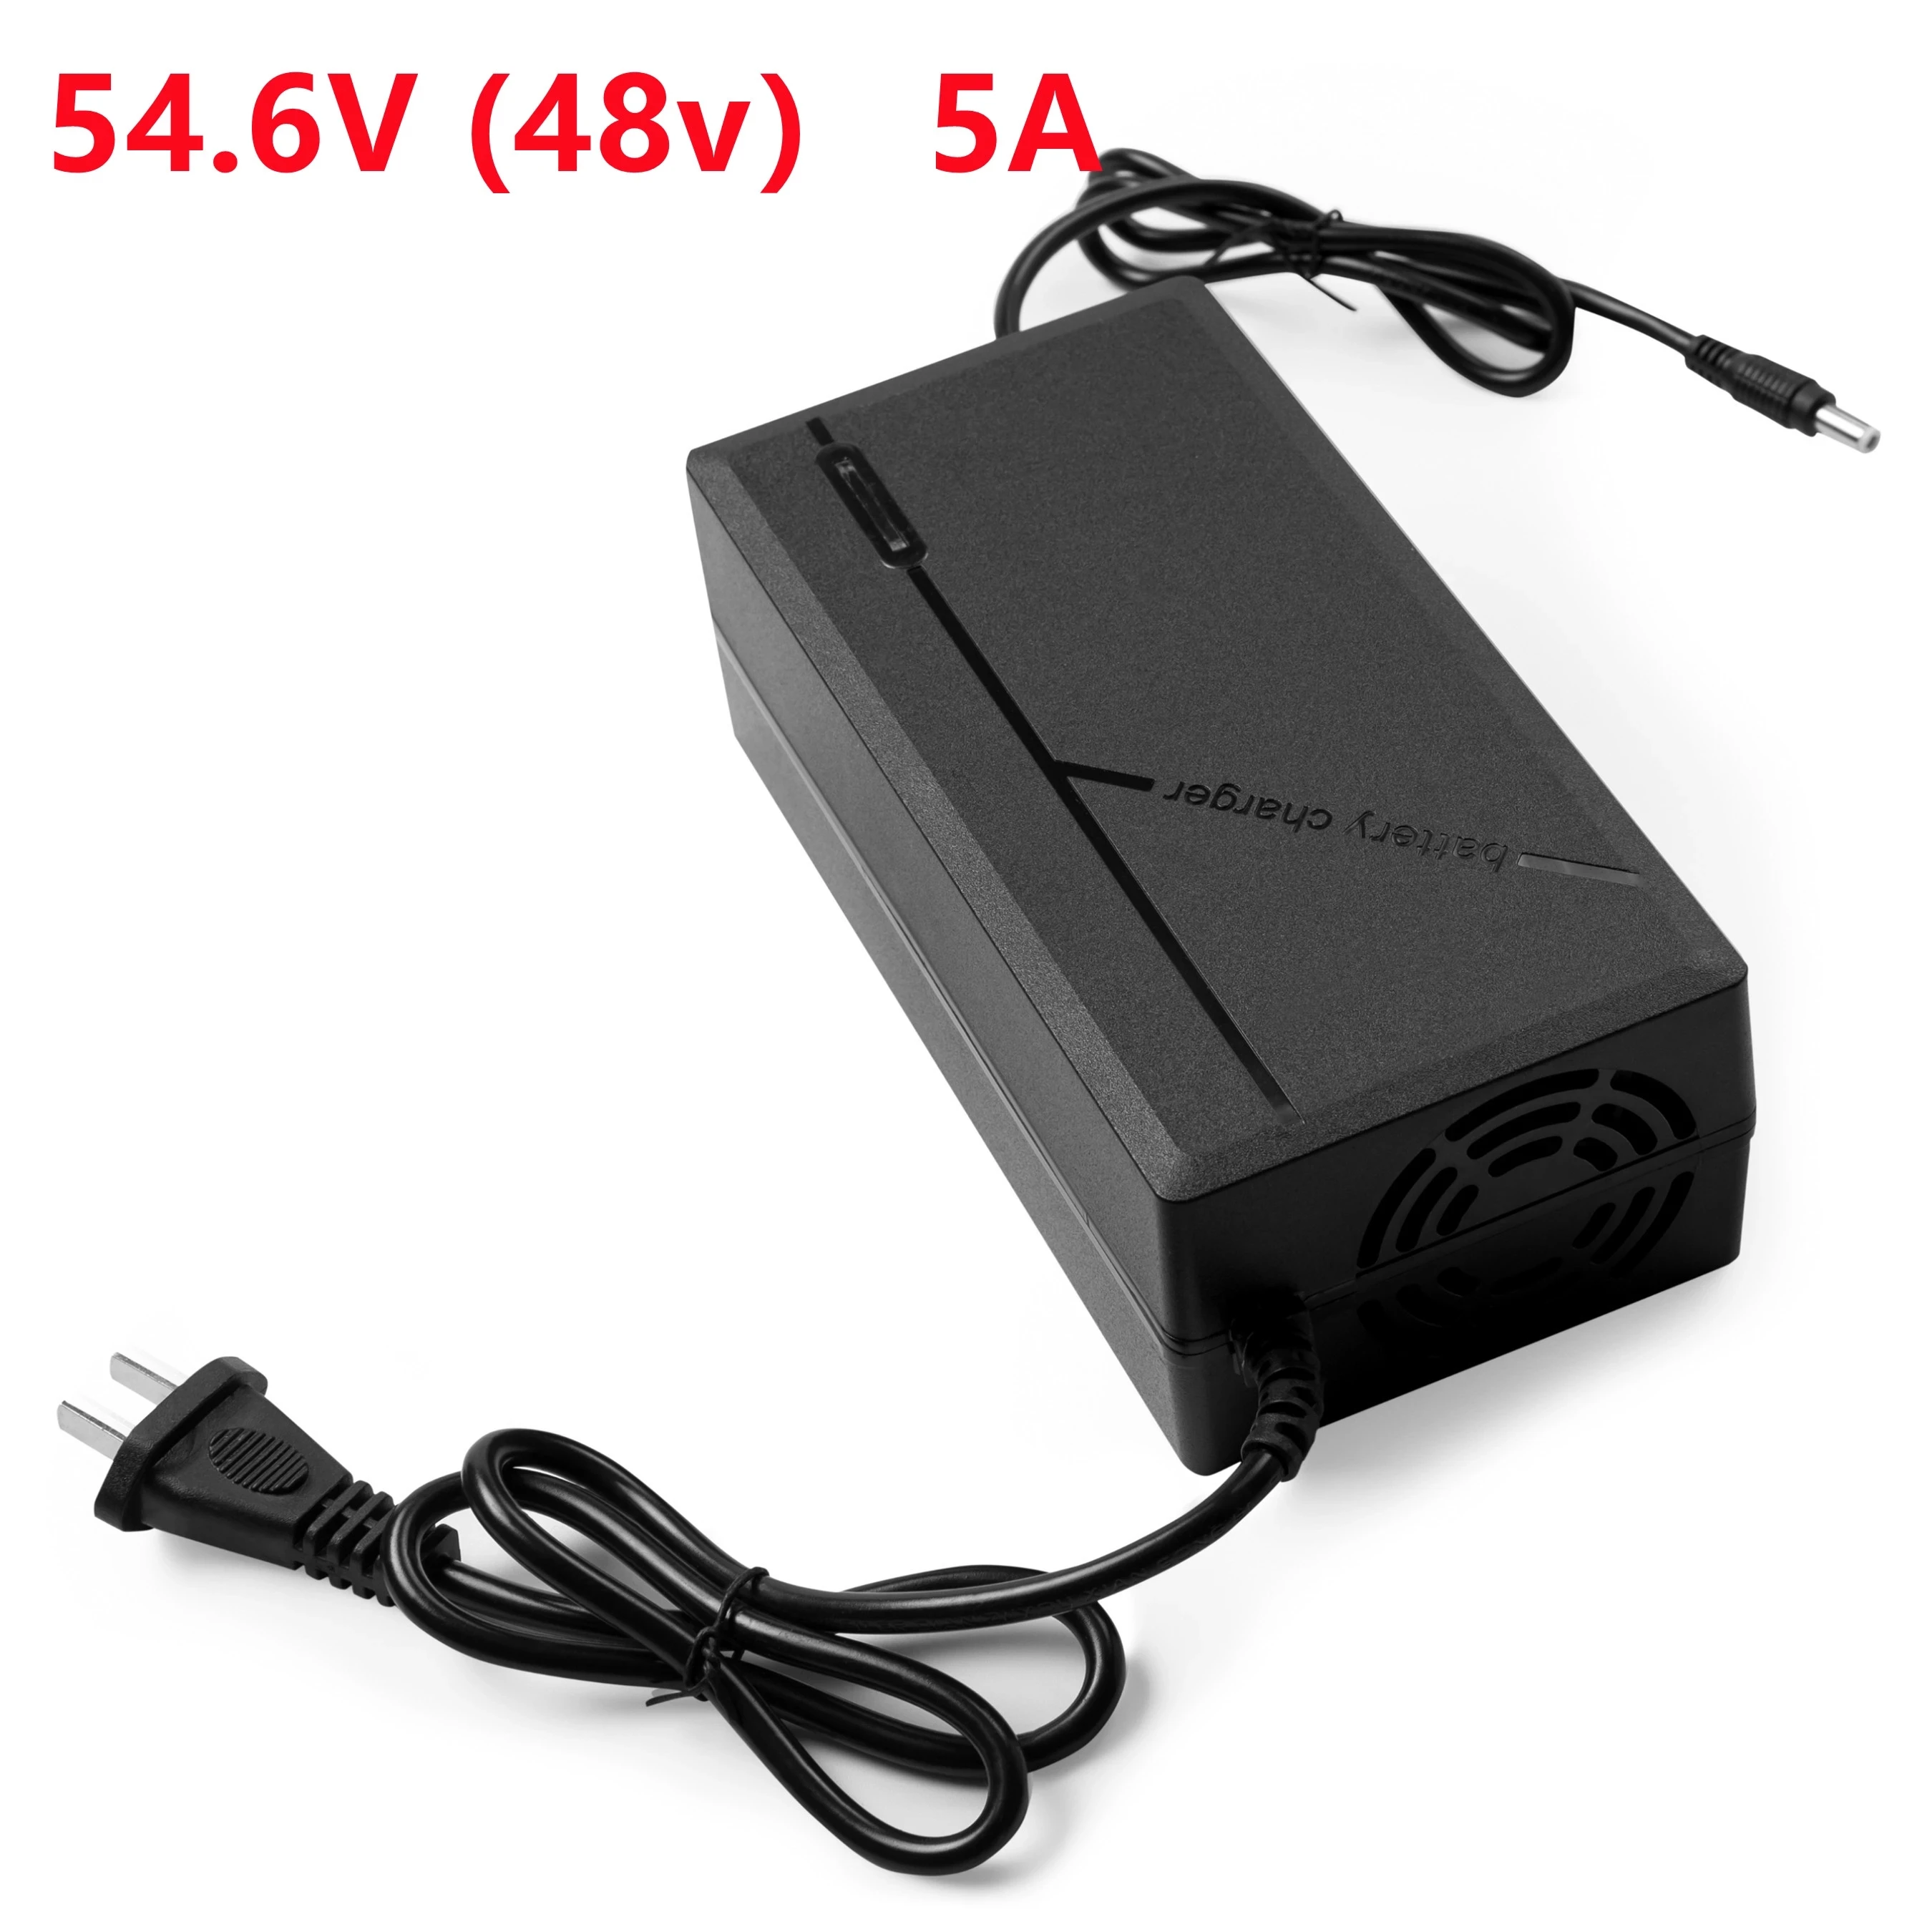 54.6V 5A Power Supply Adapter Smart Charger for 13S 48V Lithium Li